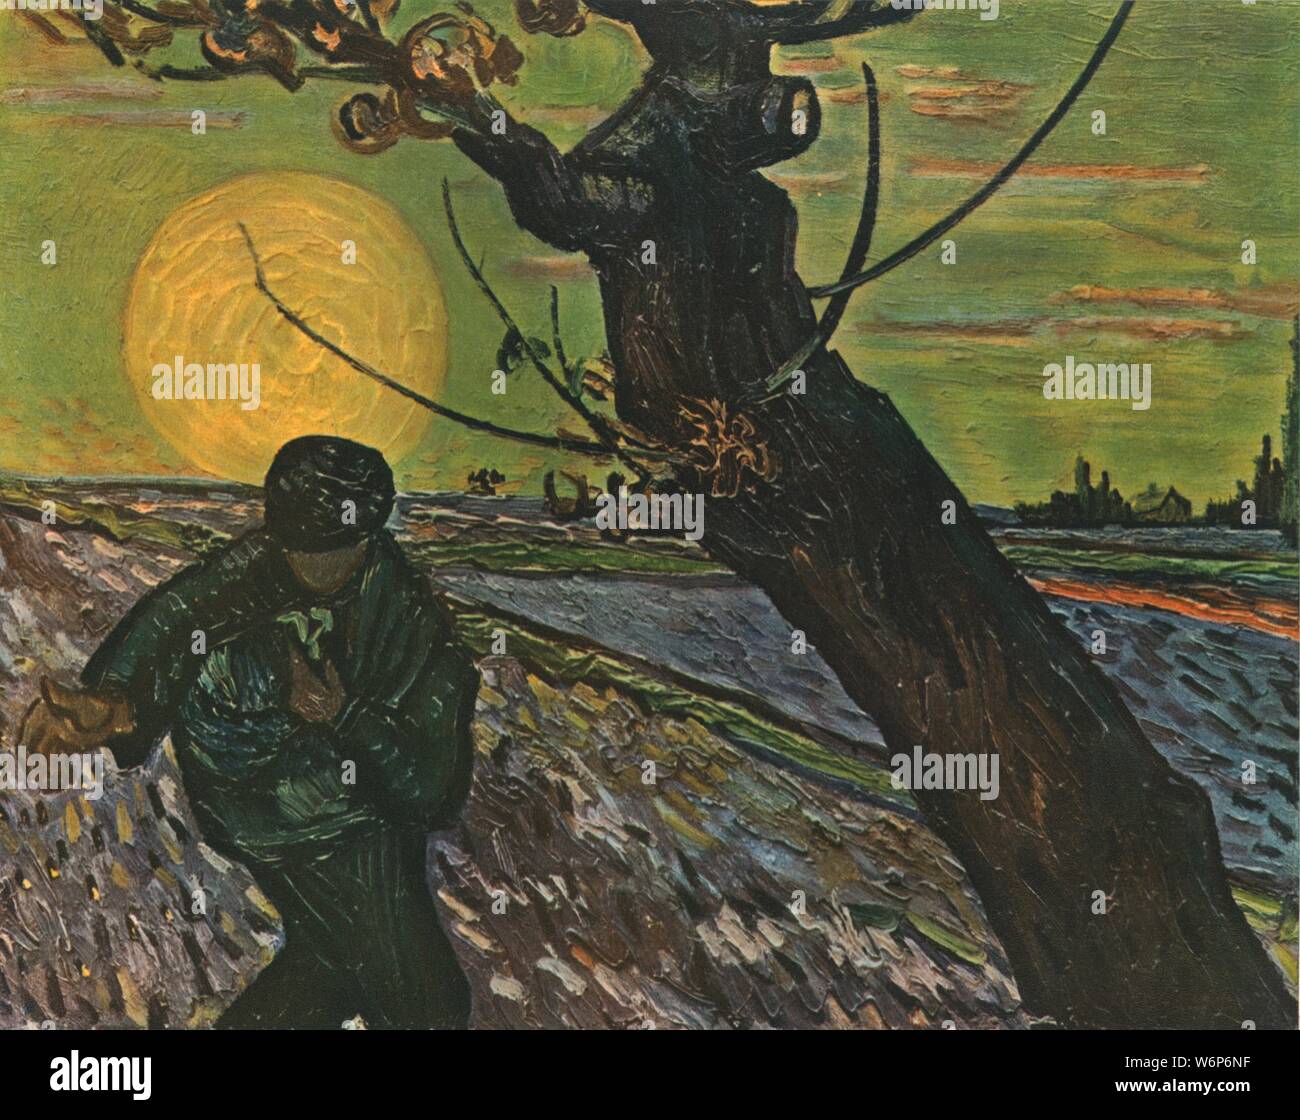 'The Sower', October 1888, (1947). Man broadcasting seed in a field against a sun low on the horizon. Painting in the Van Gogh Museum, Amsterdam. From &quot;Vincent Van Gogh&quot;, by Ludwig Goldscheider and Wilhelm Uhde. [Phaidon Press Ltd, Oxford and London, 1947] Stock Photo